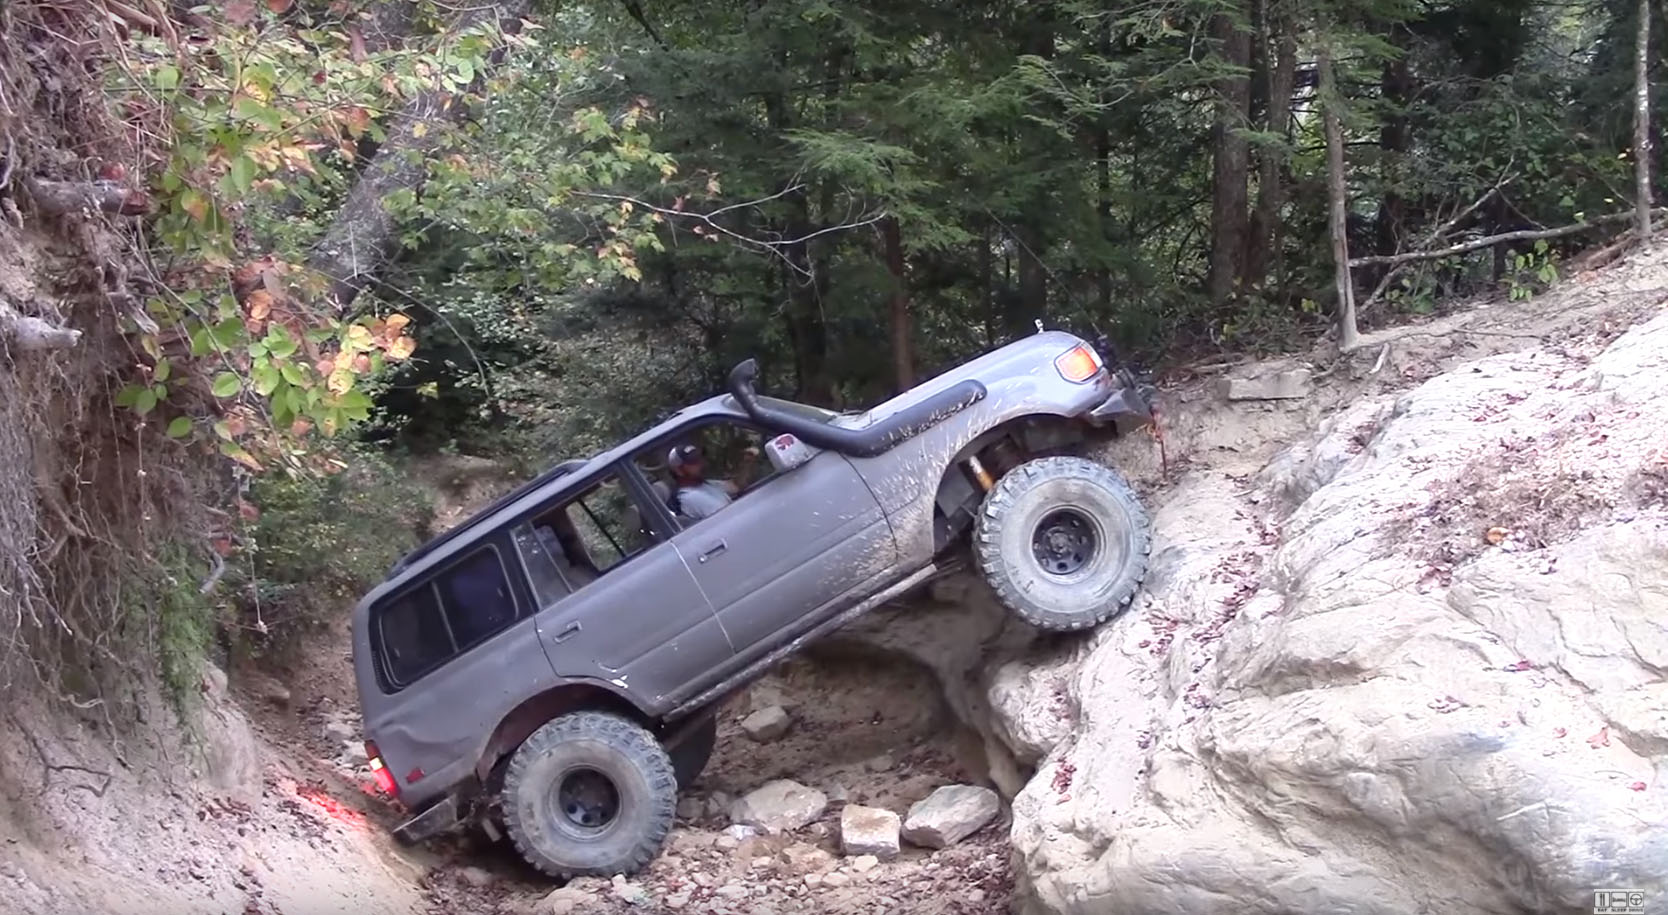 toyota-land-cruiser-80-series-off-road-fail-not-as-invincible-as-legend-has-it_3.jpg